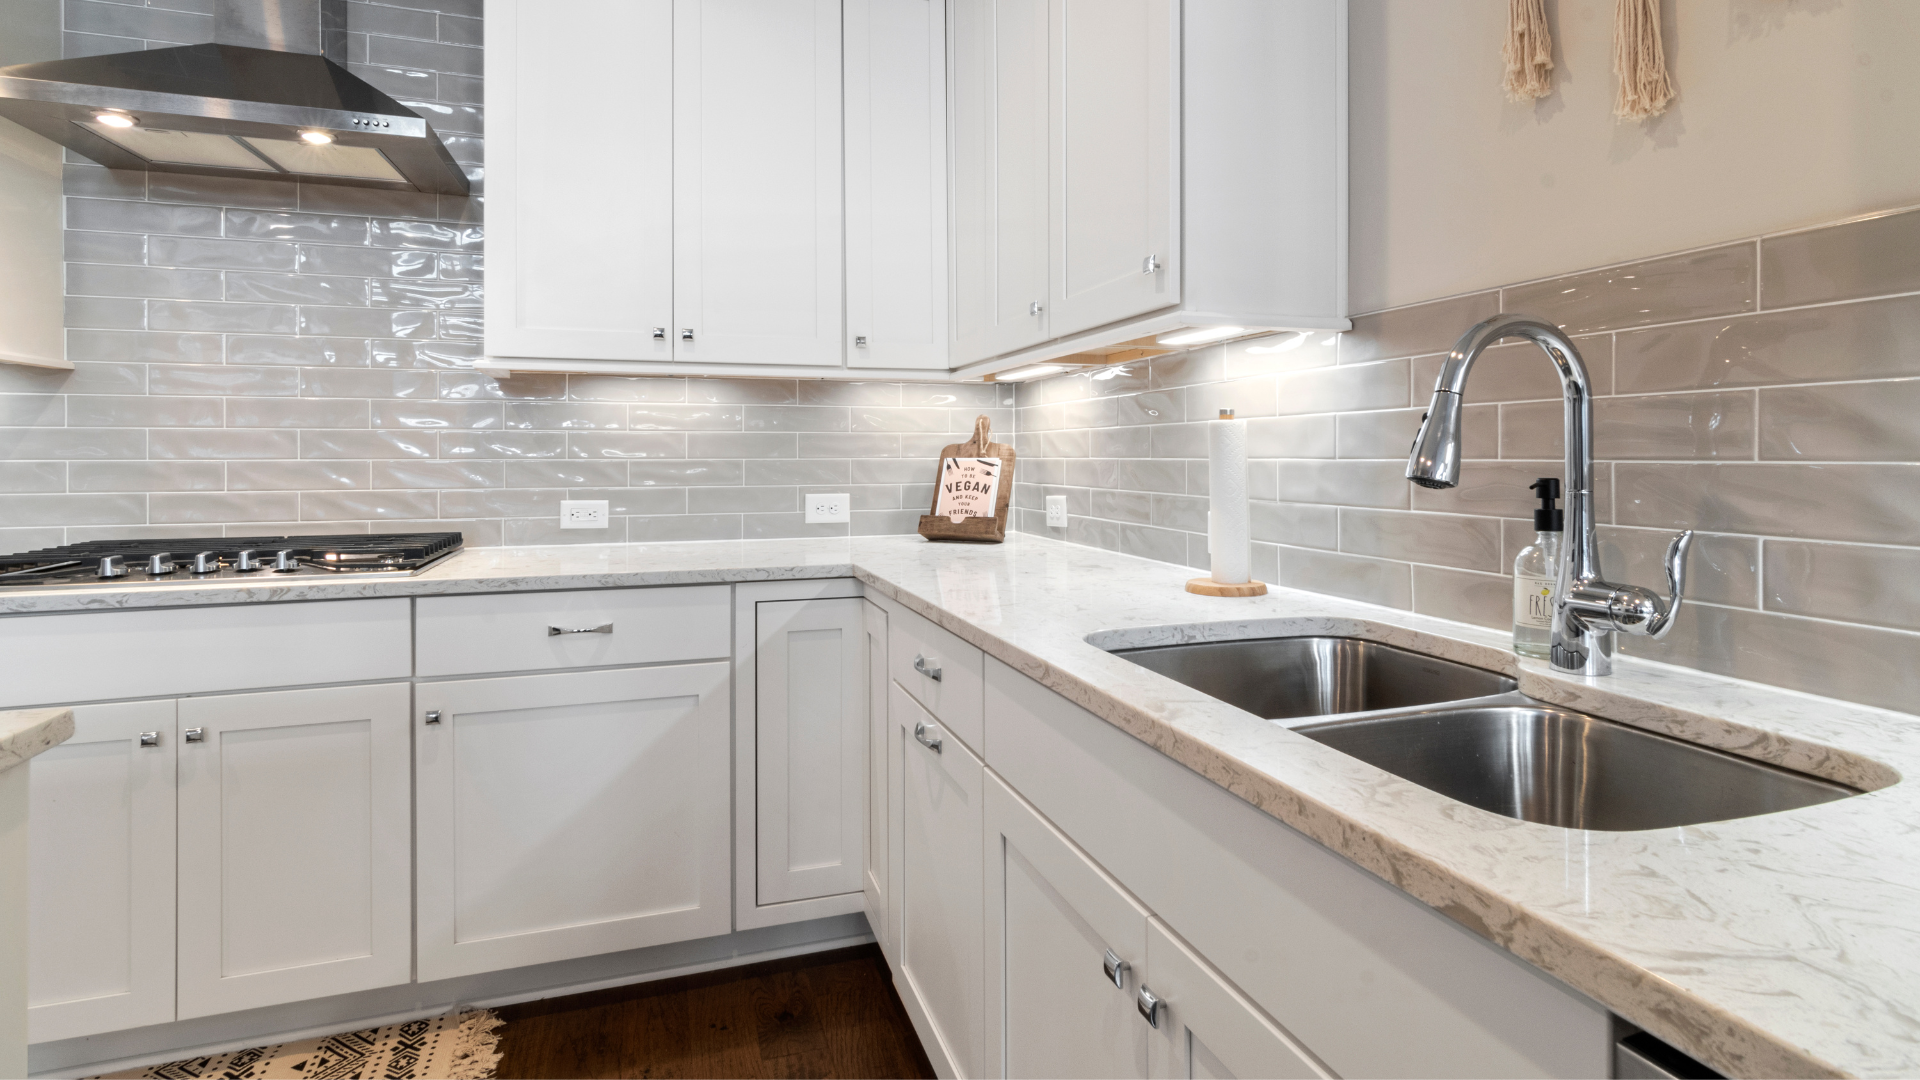 Add property value - modern kitchen remodel with white marble countertops and white cabinets